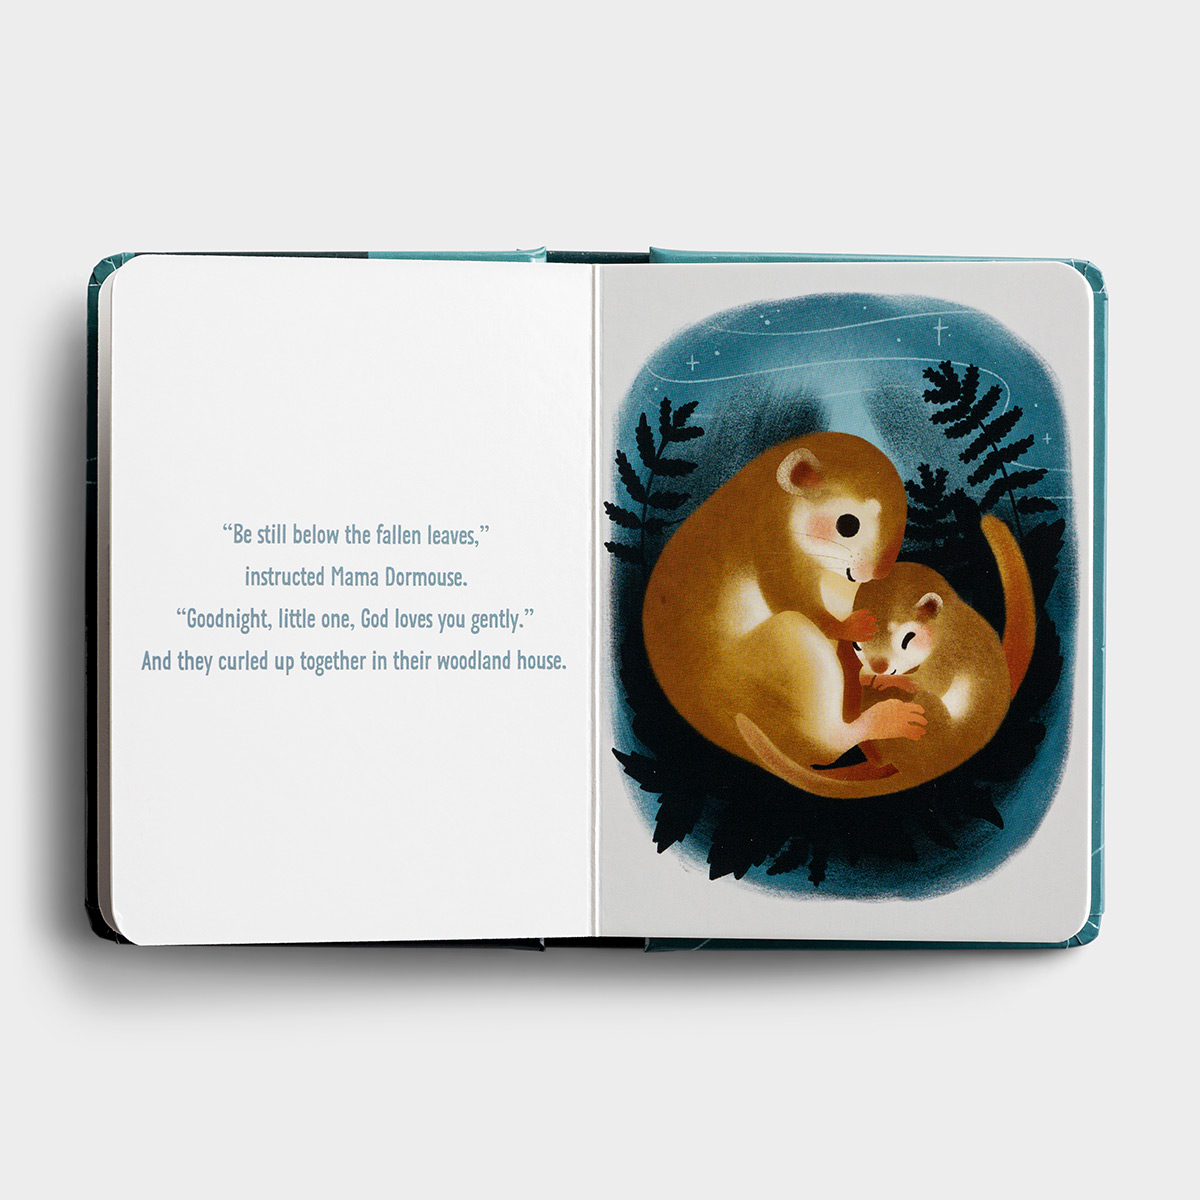 Bonnie Jensen - Goodnight Little One, God Loves You - A Tuck-Me-In Book